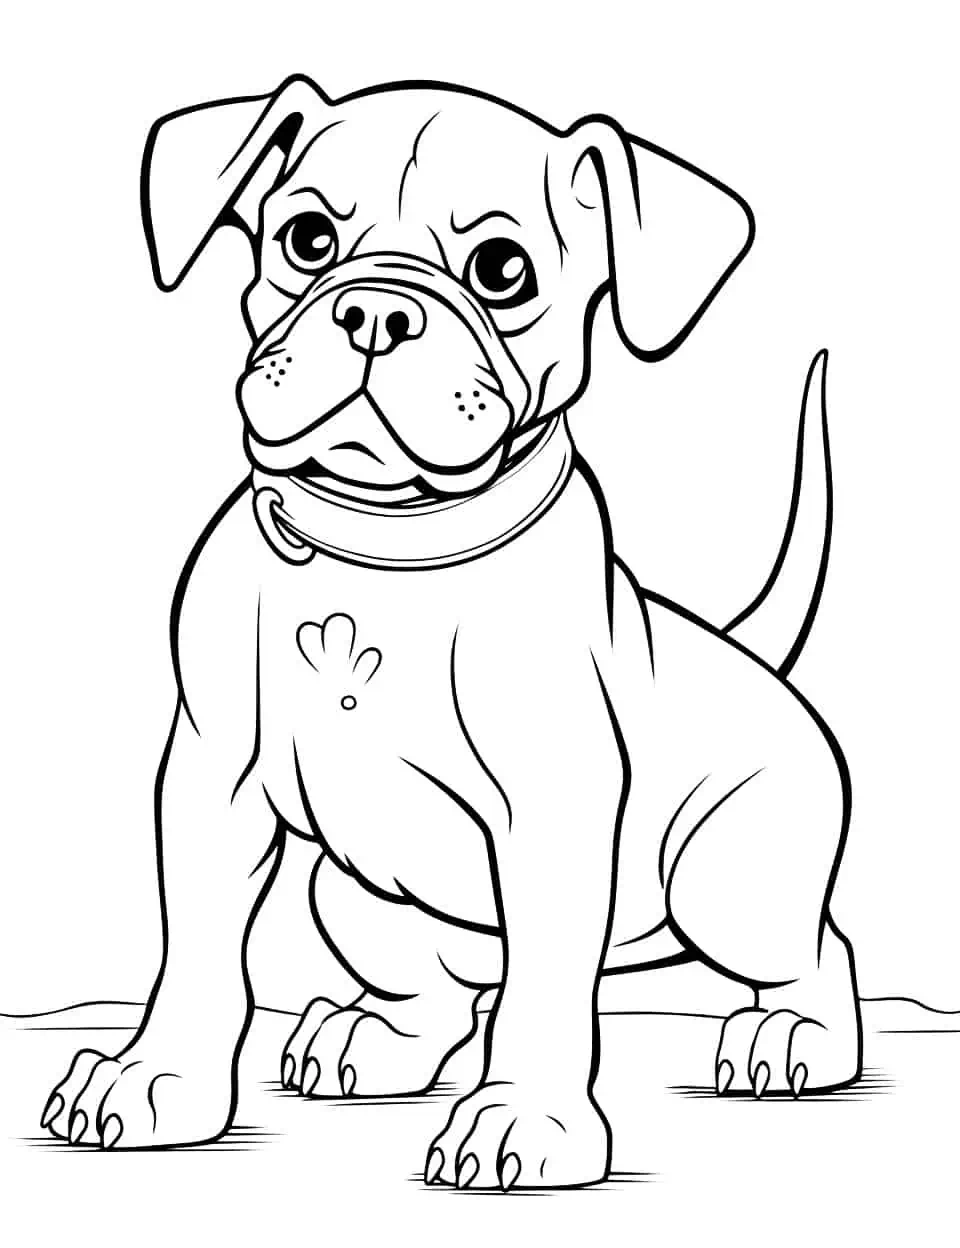 Advanced Boxer Coloring Page Dog - An advanced coloring page featuring a Boxer dog in a dynamic action pose.